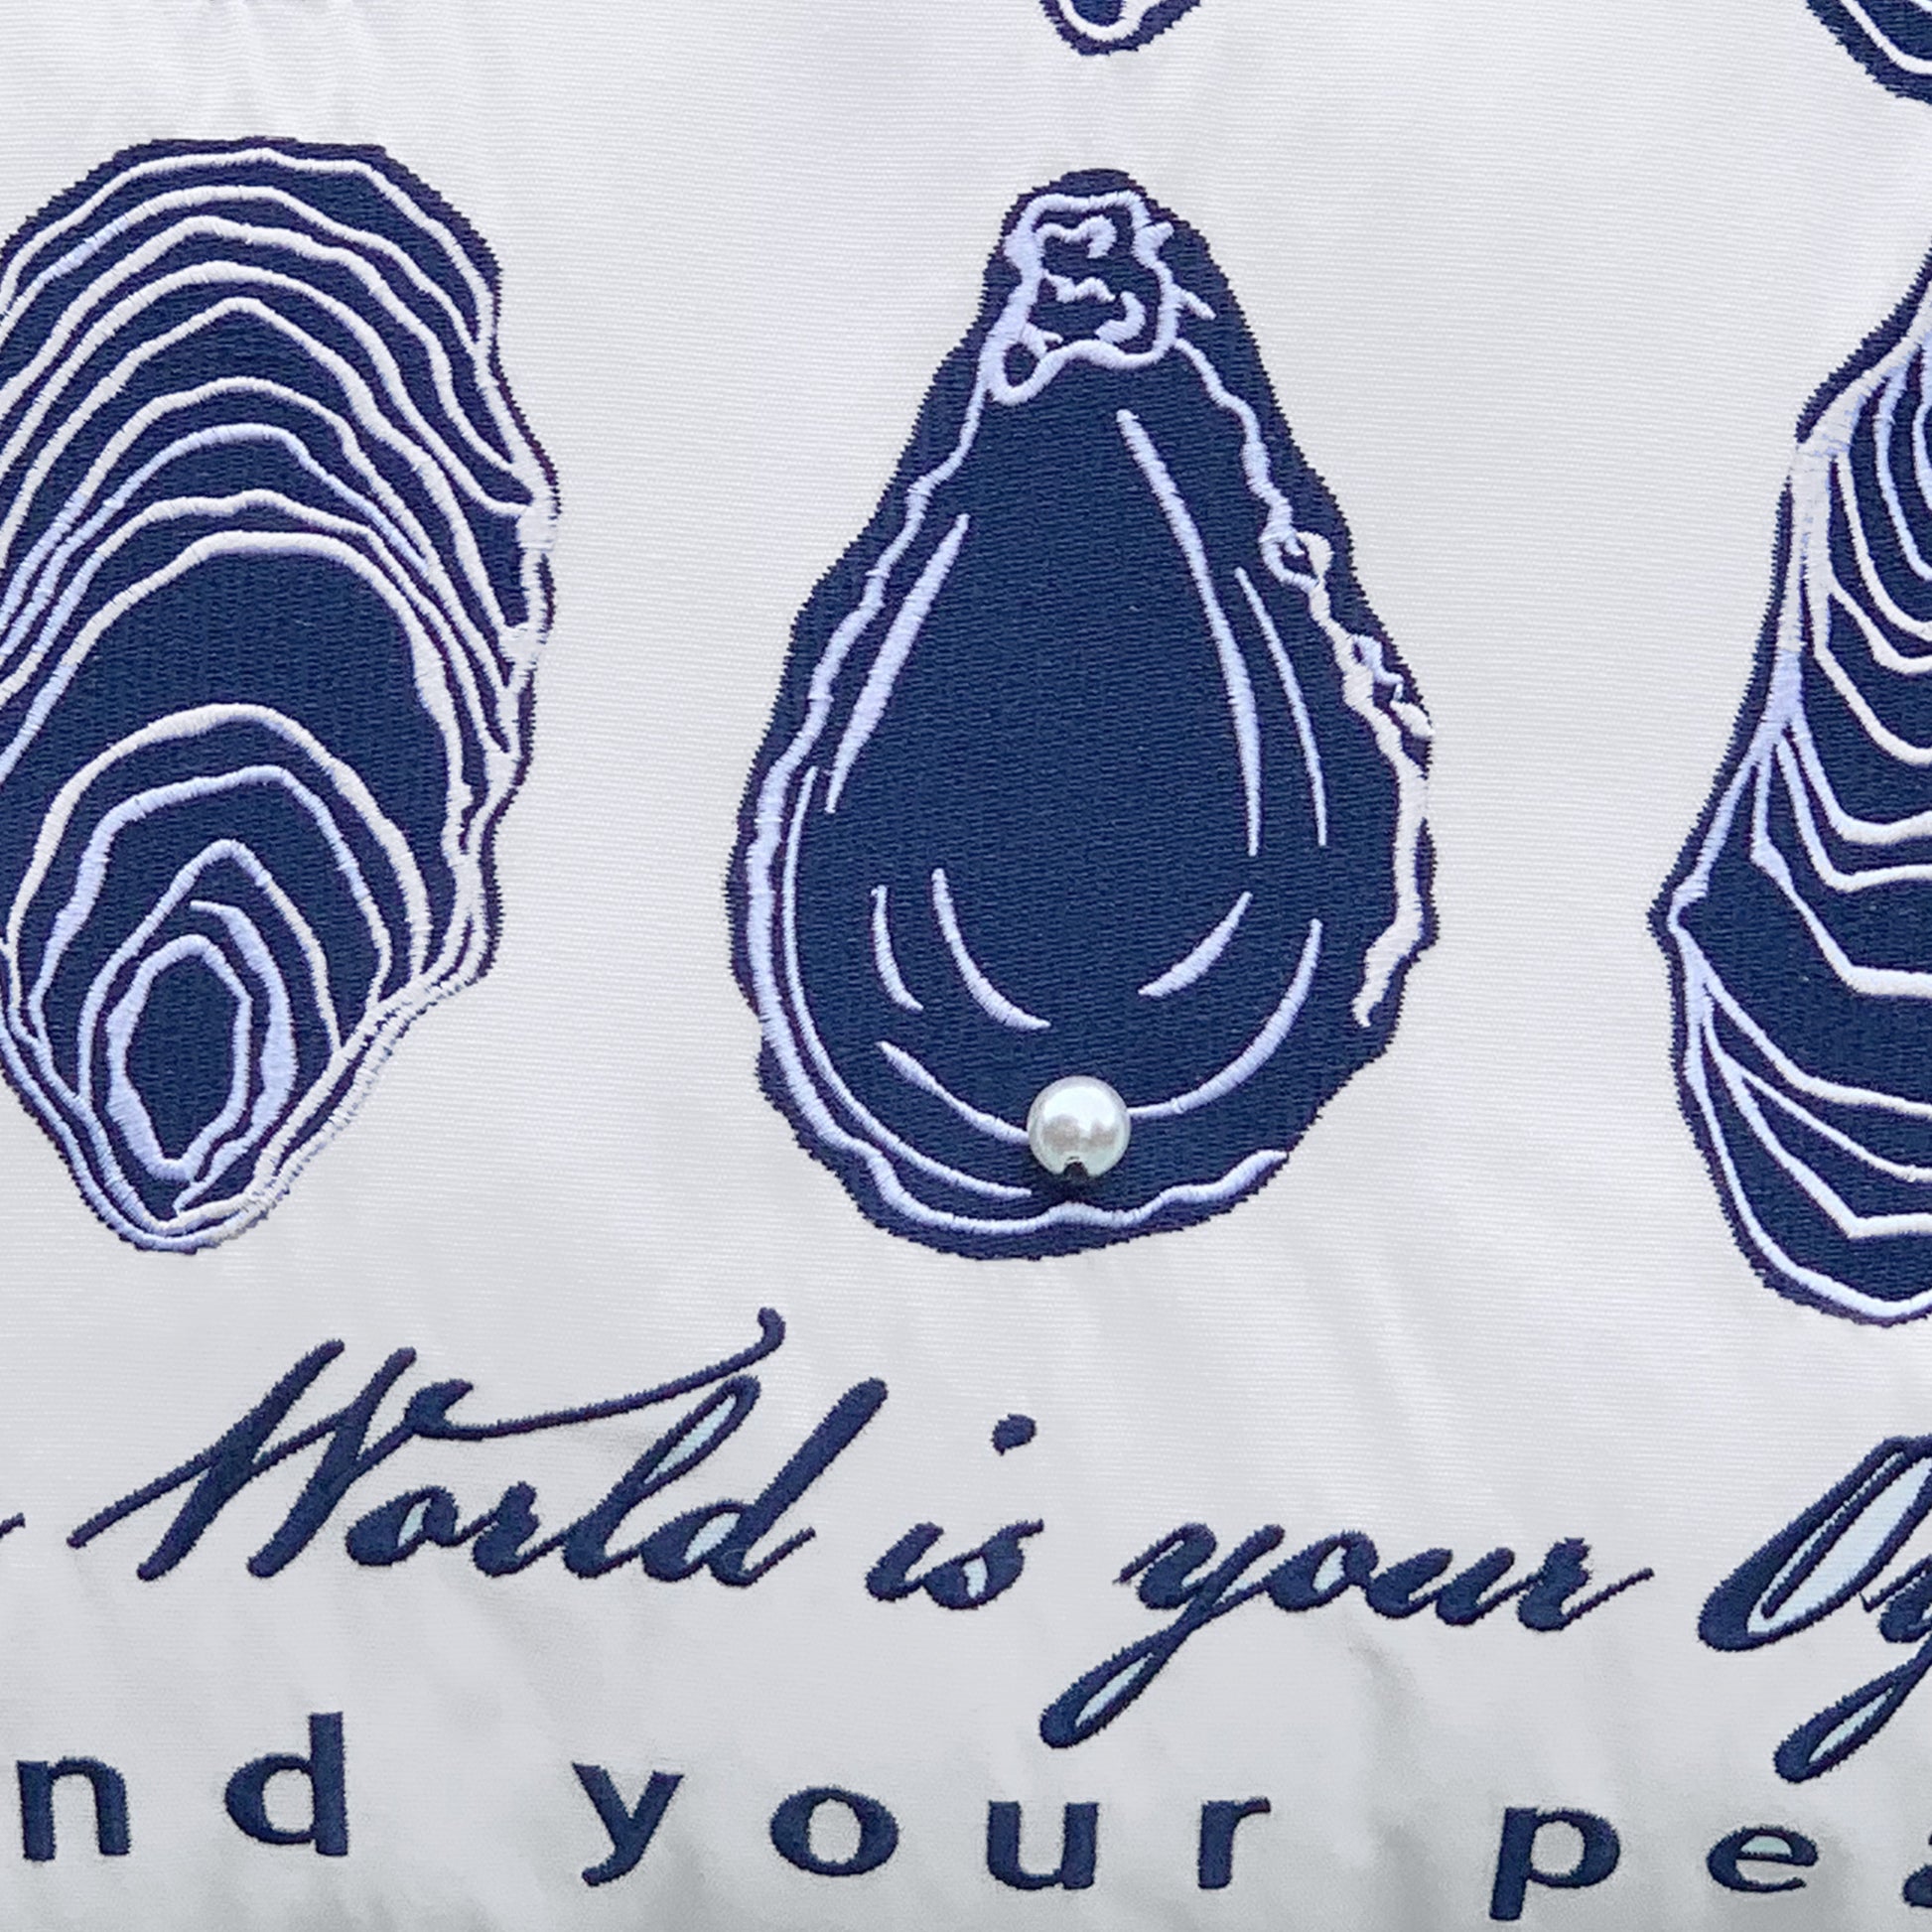 Detail shot of the World Is Your Oyster Indoor Outdoor Pillow.